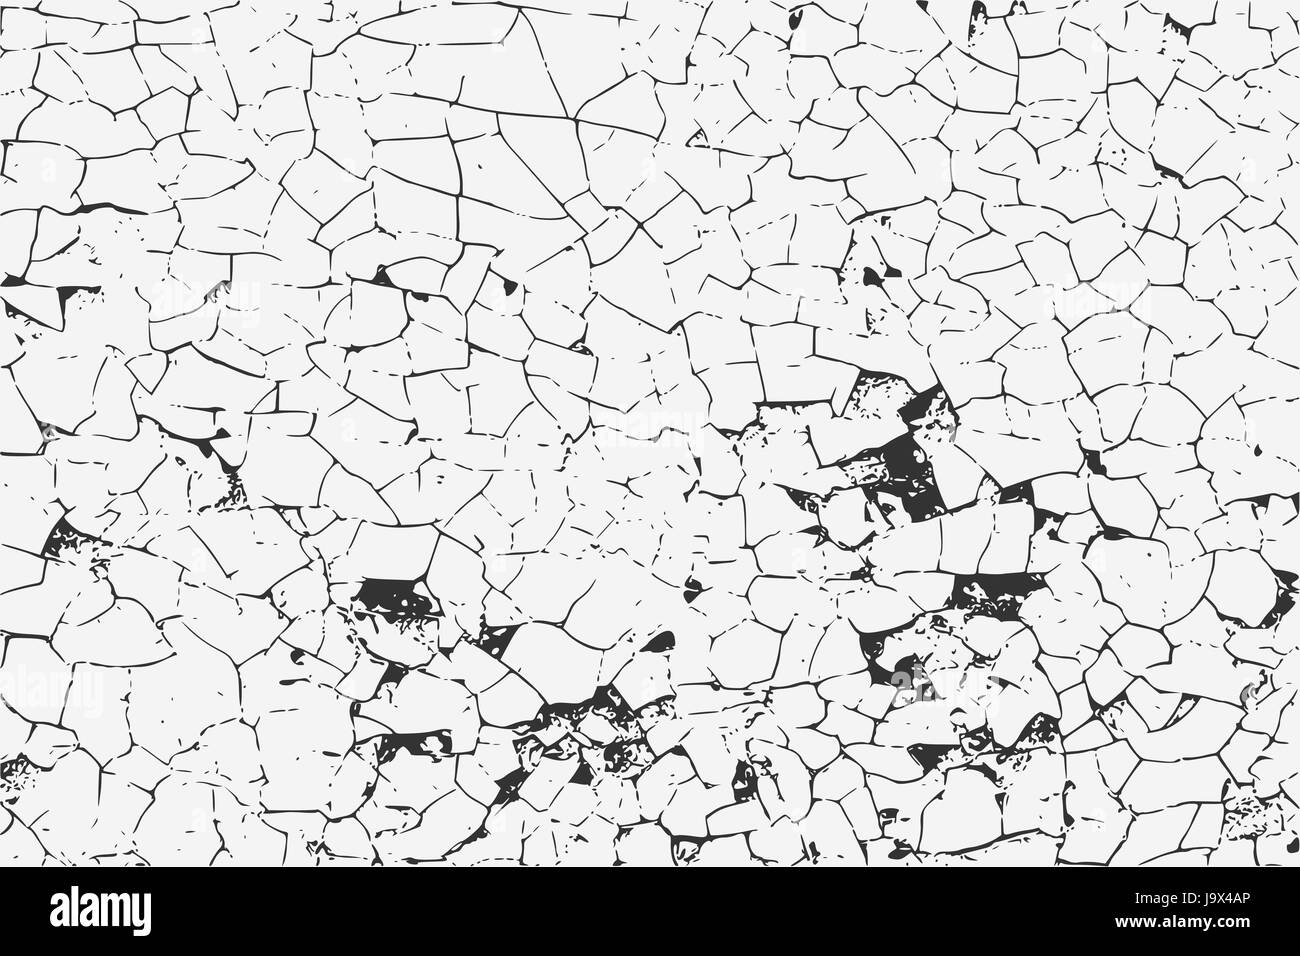 Grunge texture overlay. Vector illustration of black and white abstract grunge old weathered fond fissuré pour votre conception Illustration de Vecteur